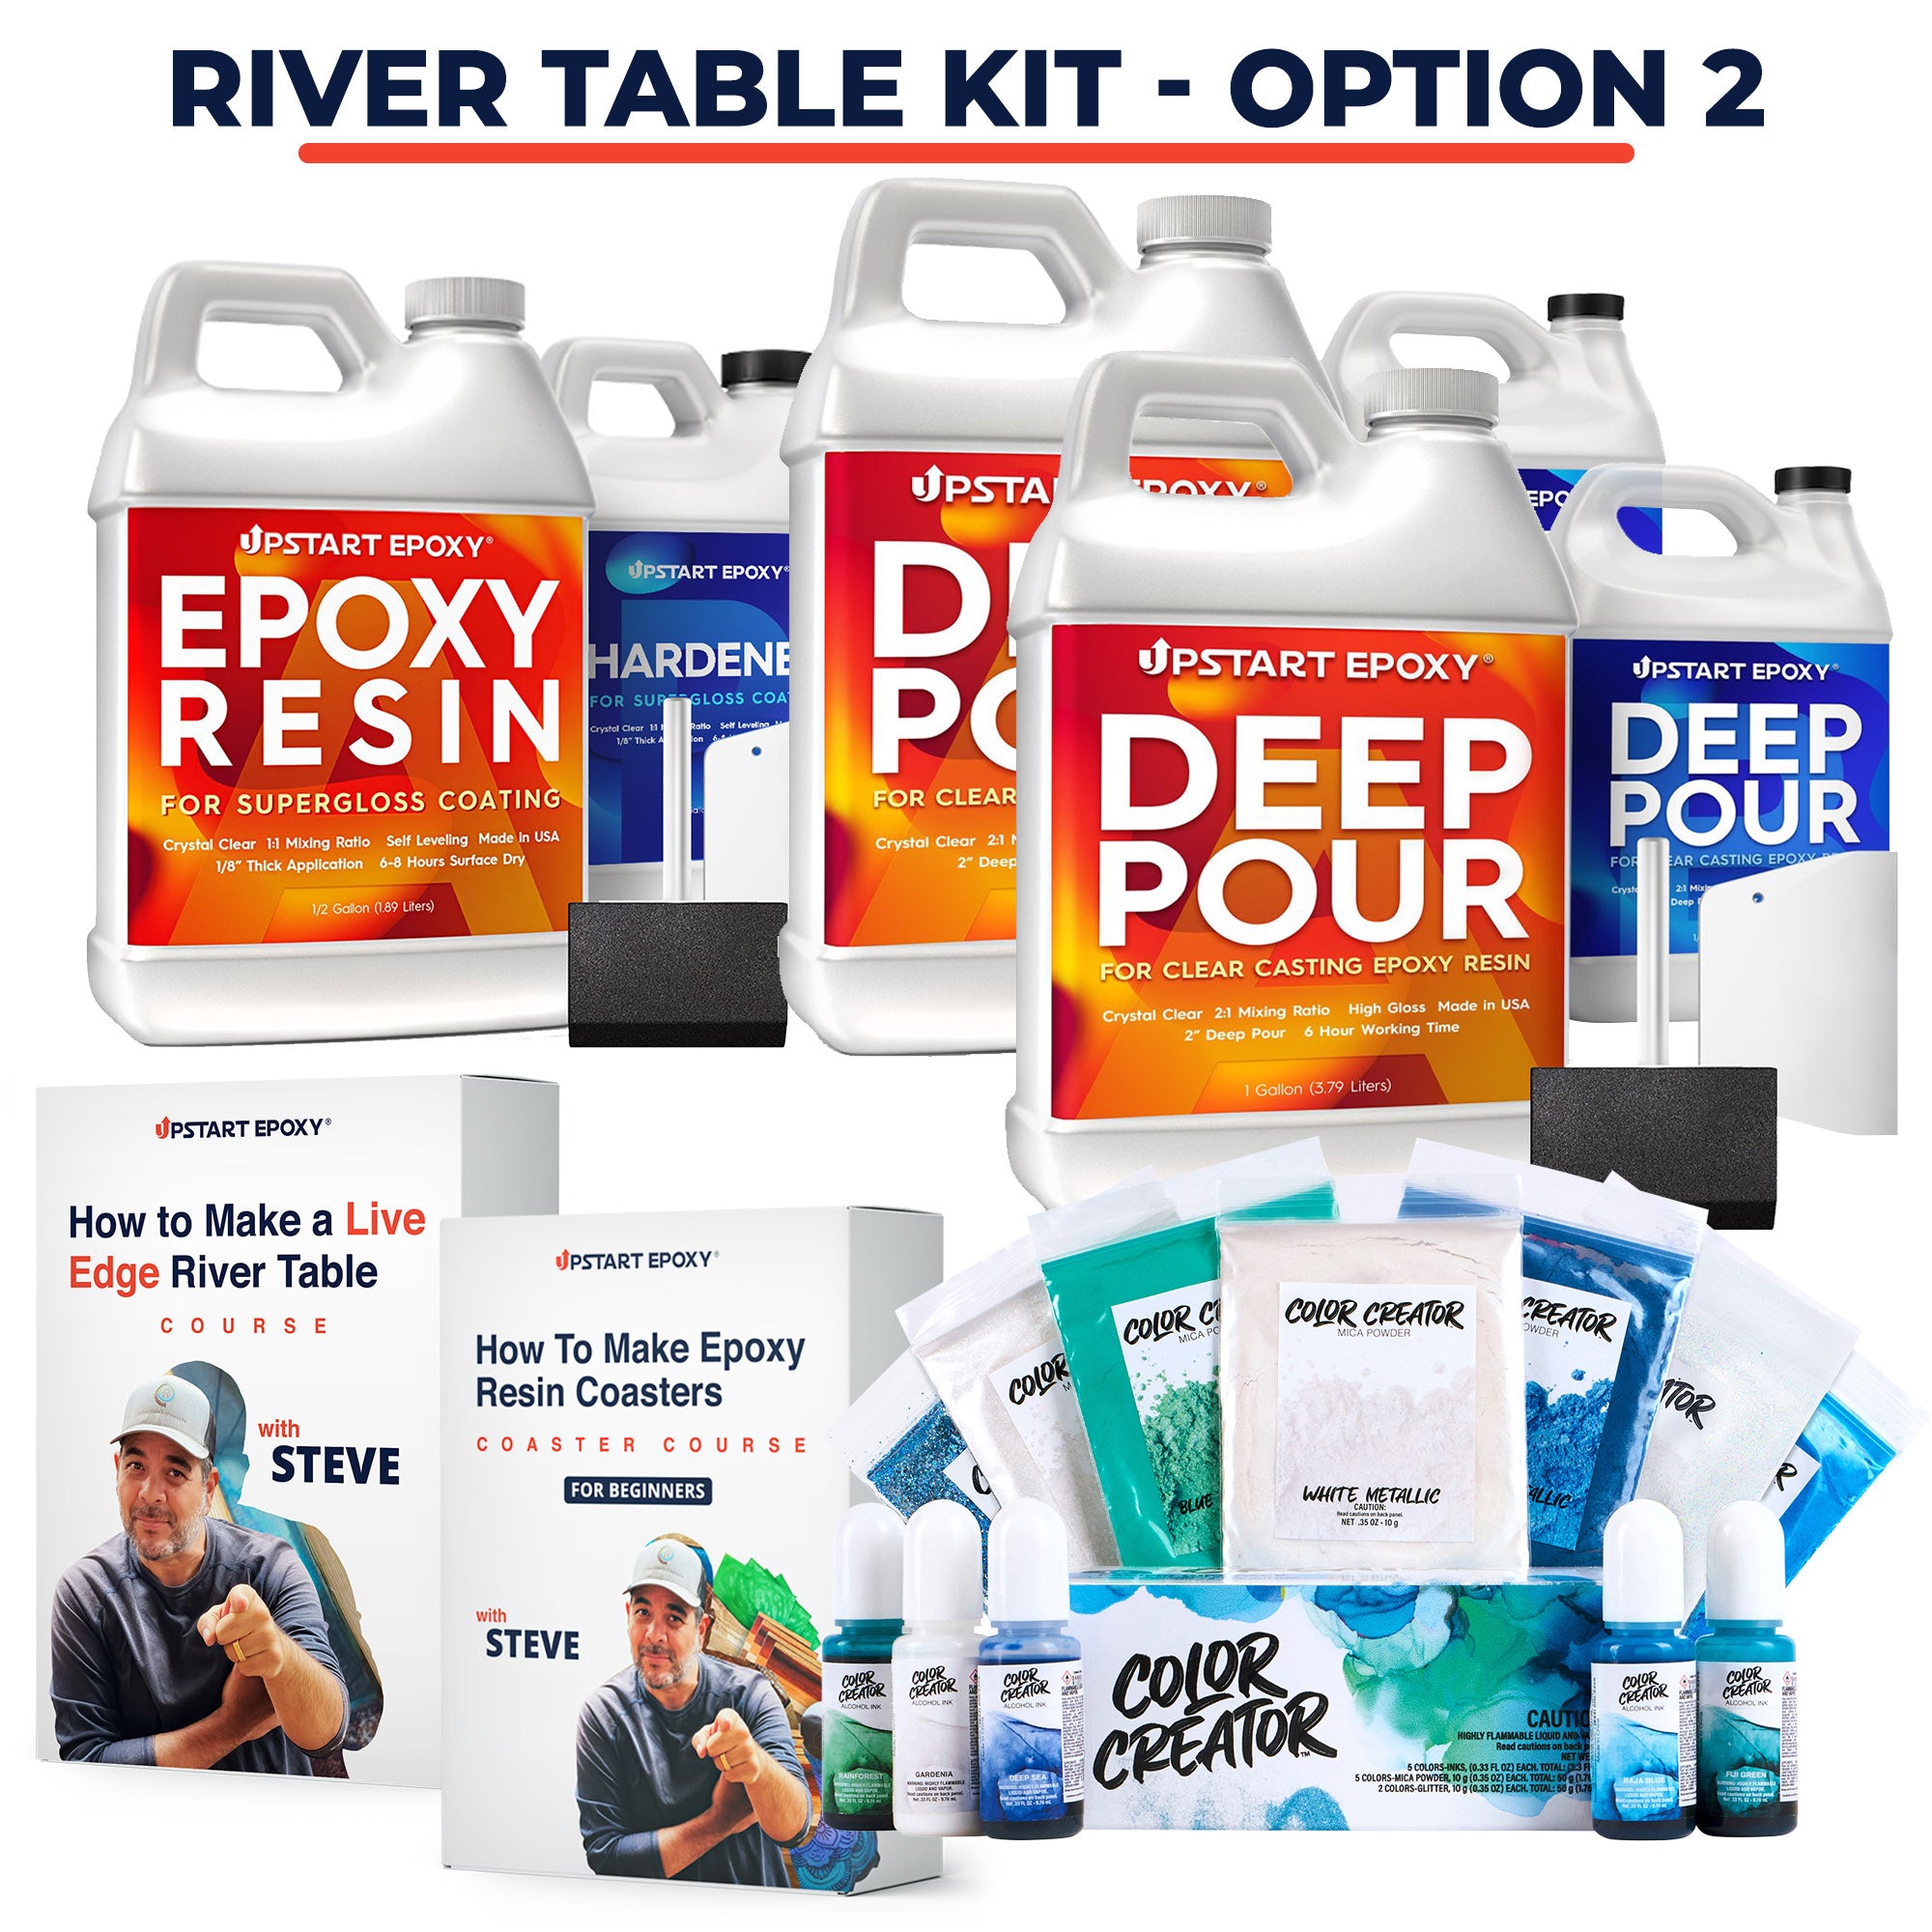 3-Gallon 4 Deep Pour Epoxy Resin Kit for River Tables, Craft